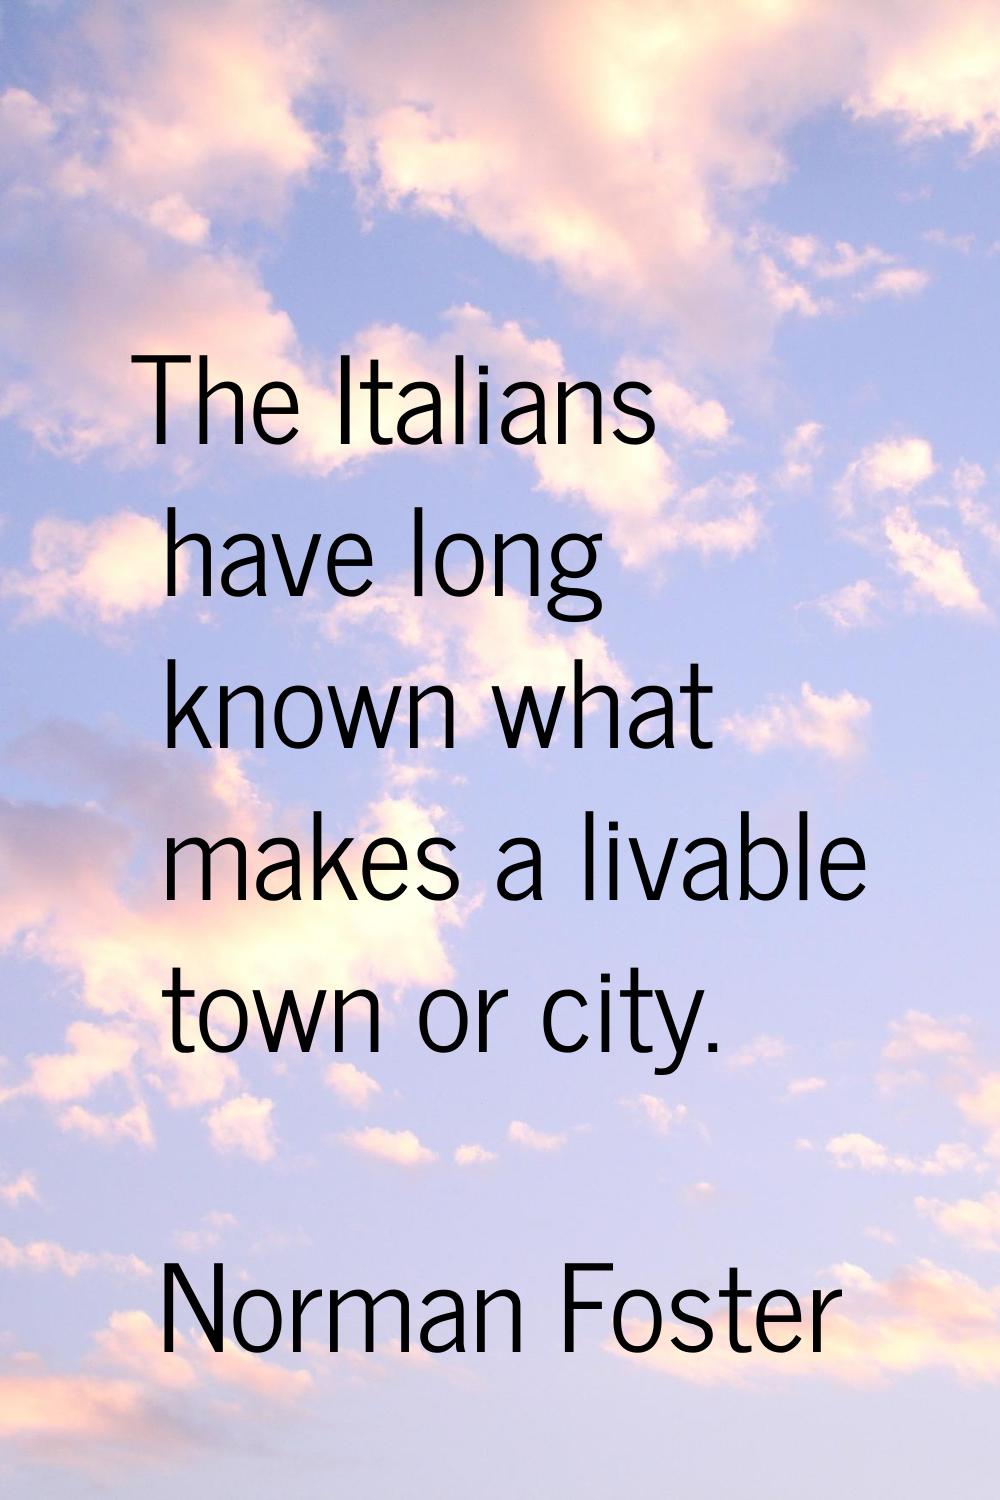 The Italians have long known what makes a livable town or city.